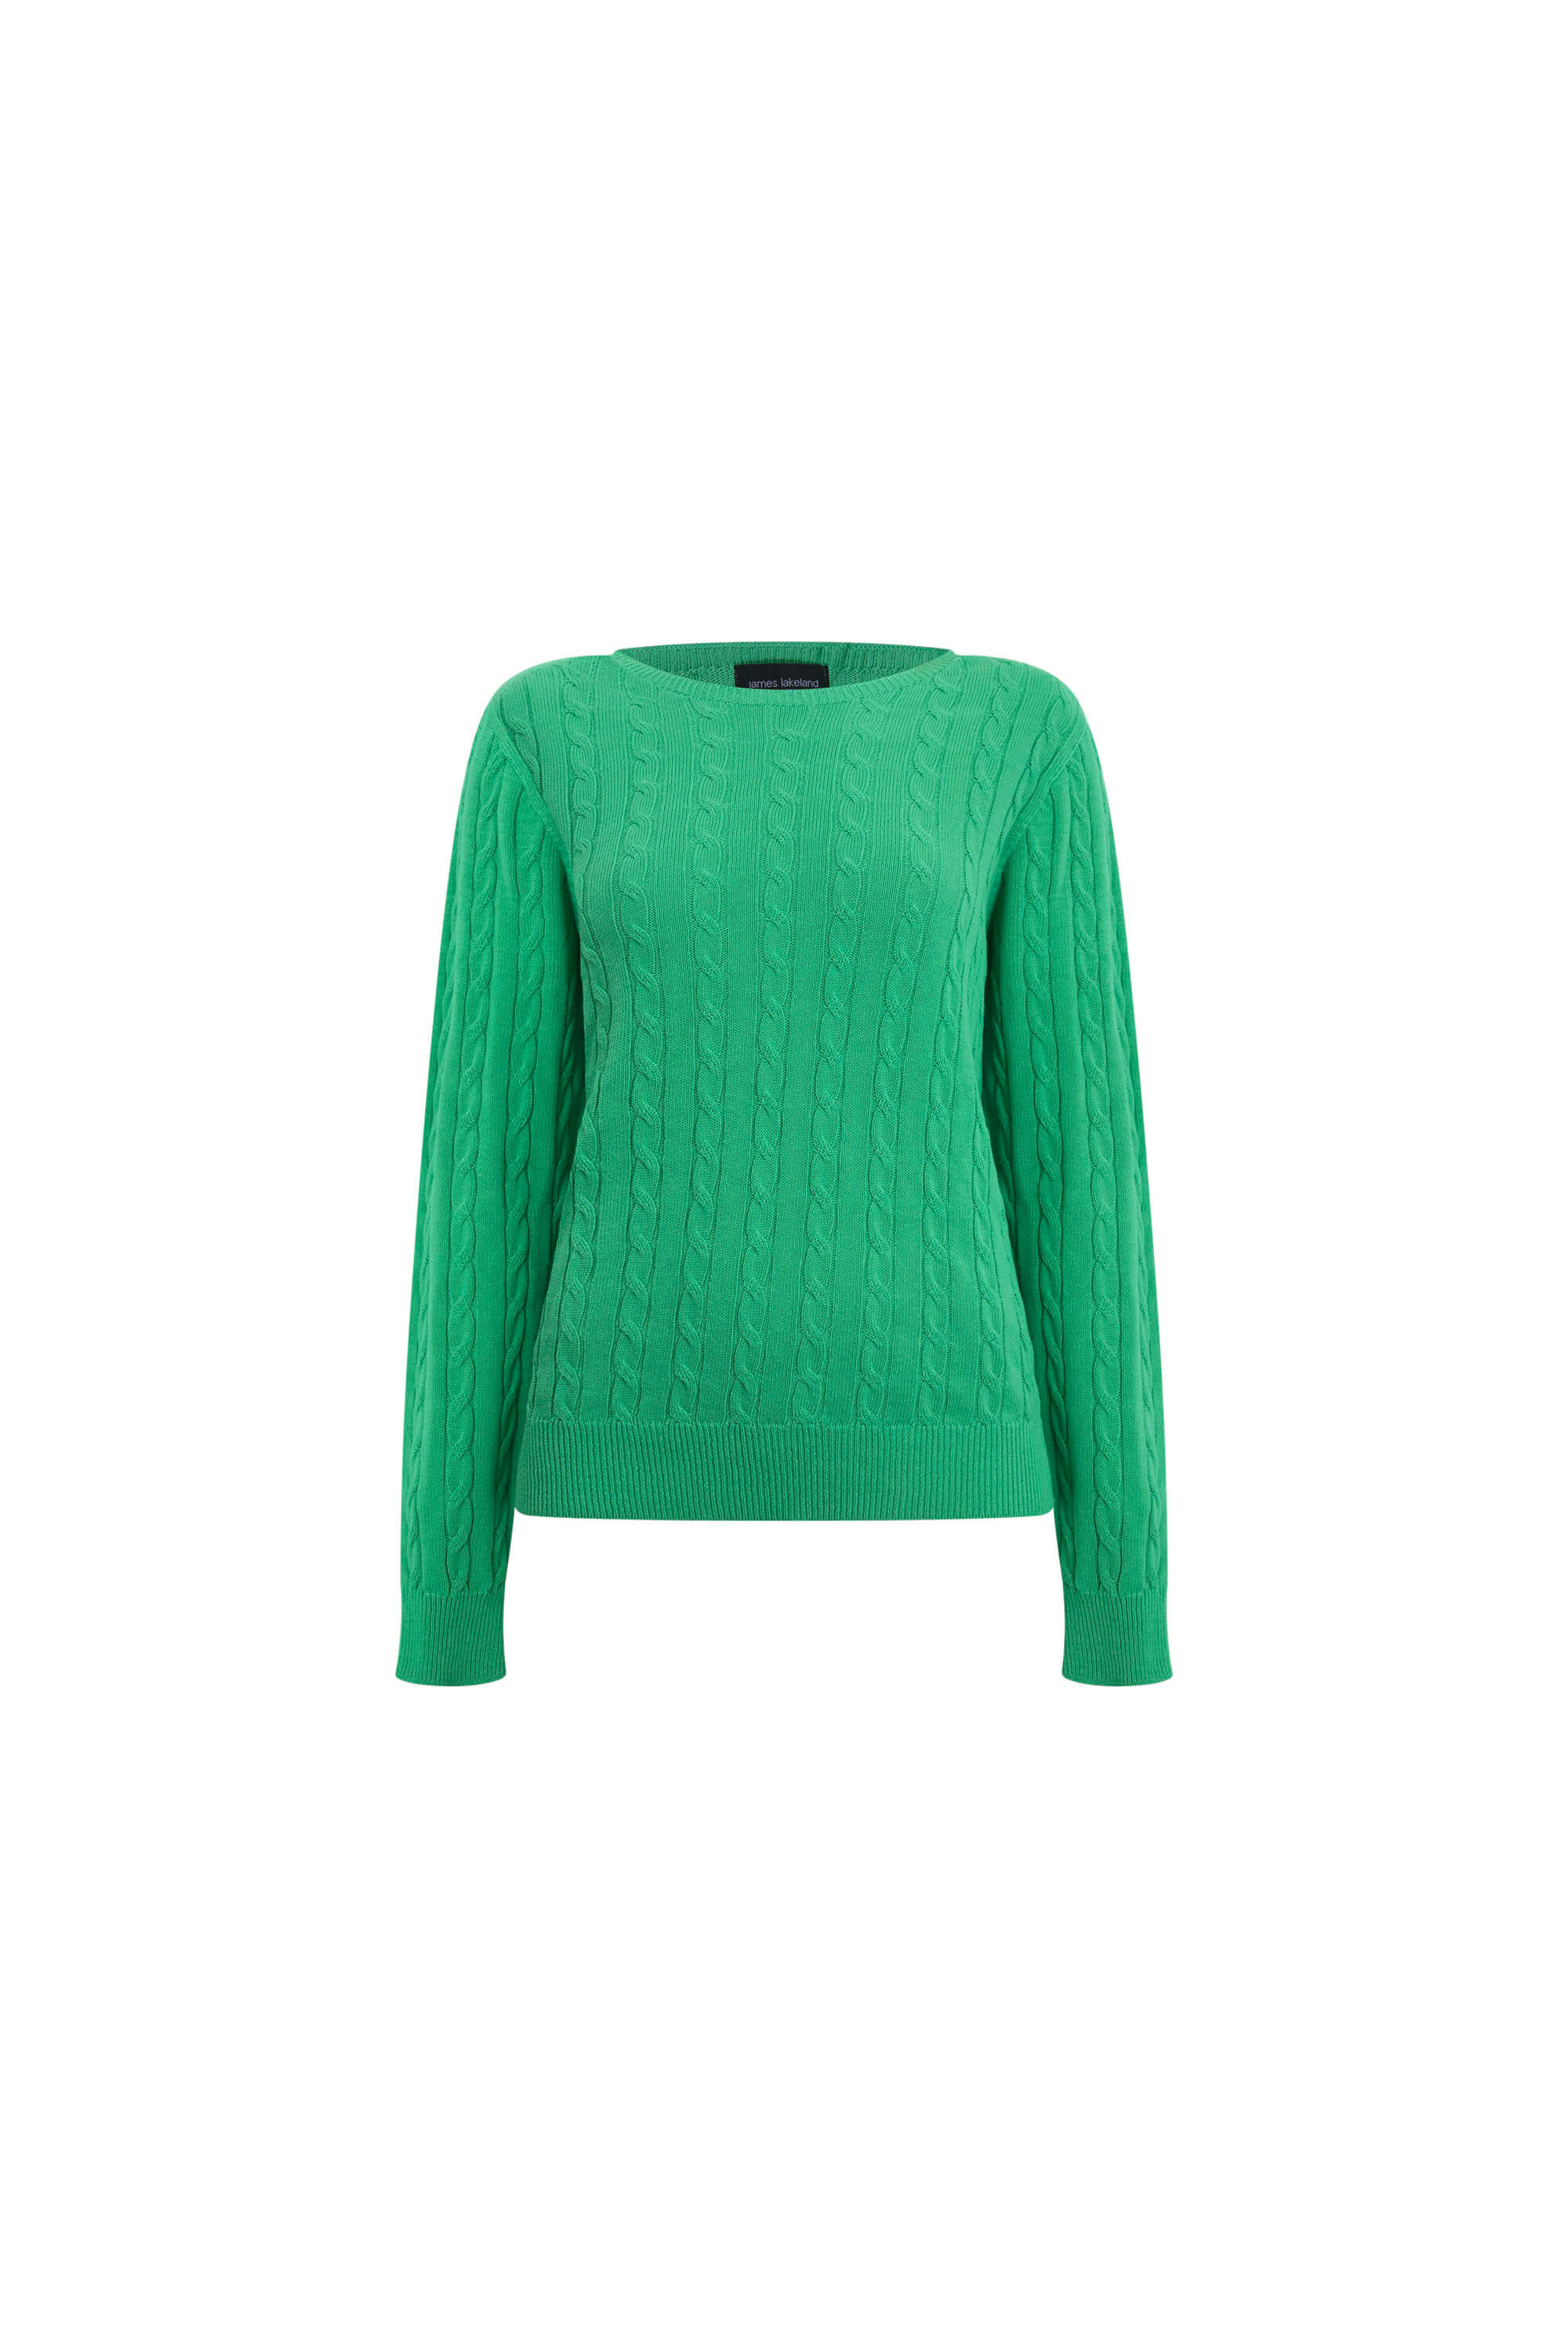 Women’s Cable Knit Jumper Green Extra Small James Lakeland